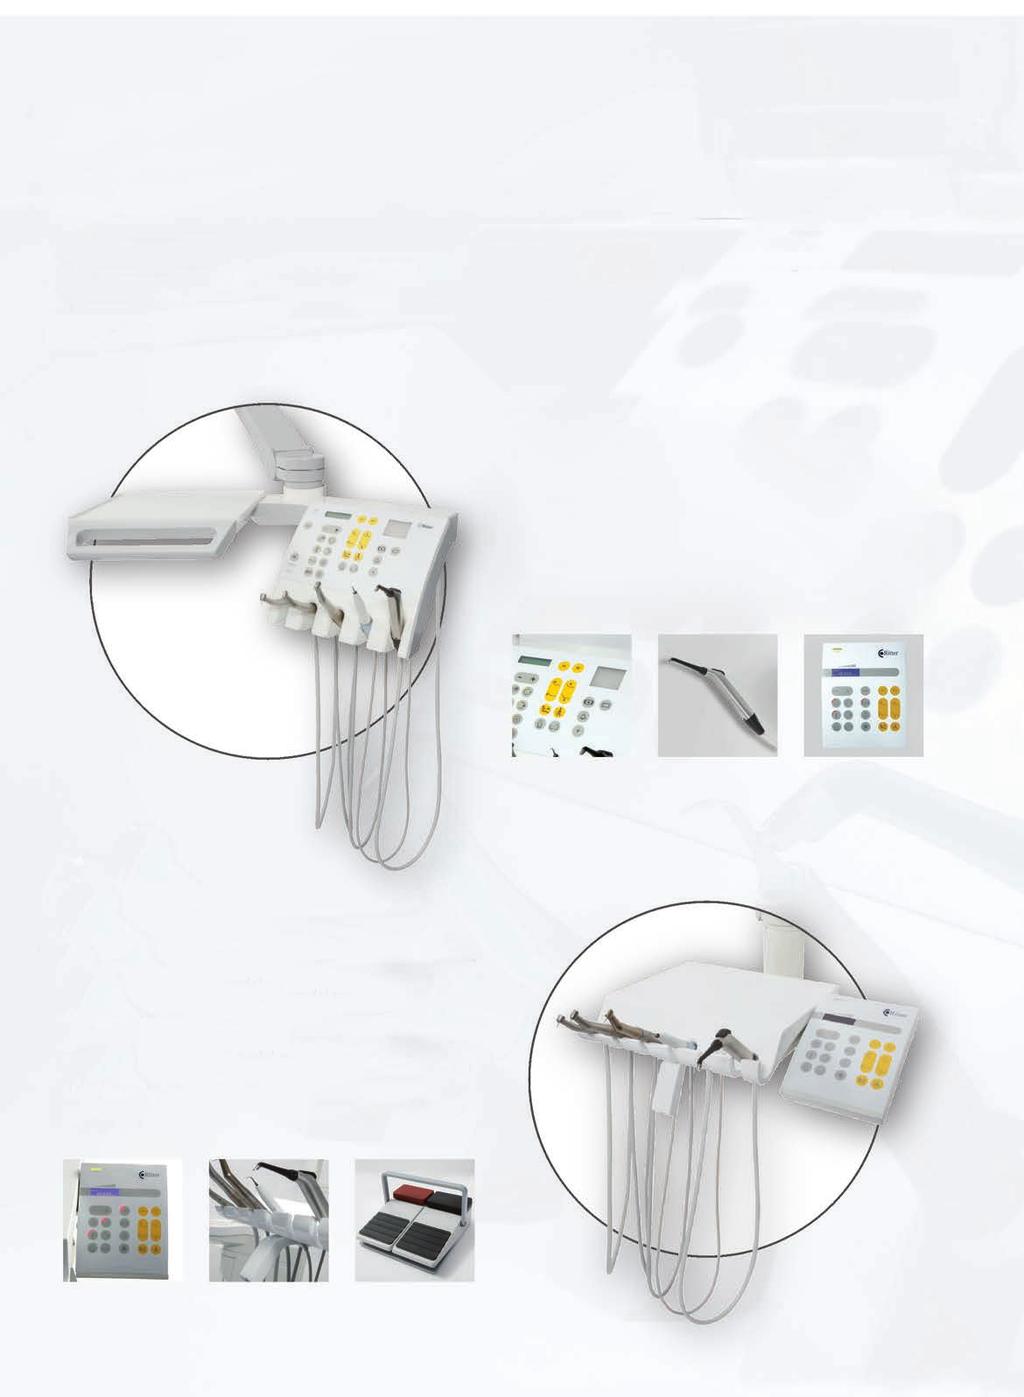 Your Choice All Ritter Contact Line models are available in one of four distinct delivery styles to allow the dentist to choose the right version for his or her preferred working method.